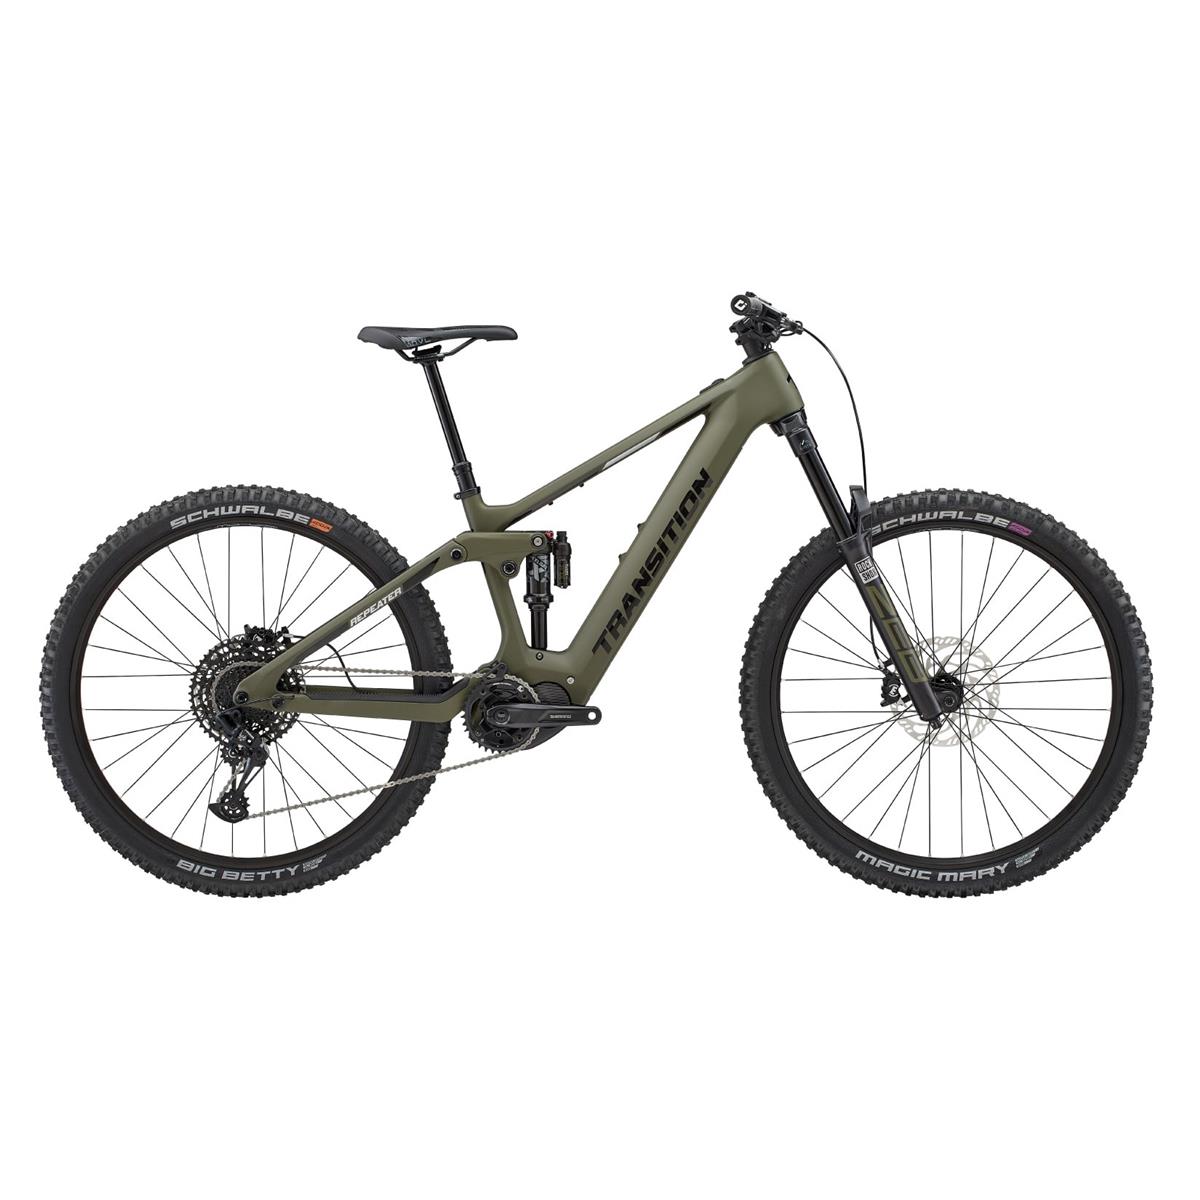 Repeater Carbon NX 29'' 160mm 12v 630Wh Shimano EP8 Mossy Green Taglia S